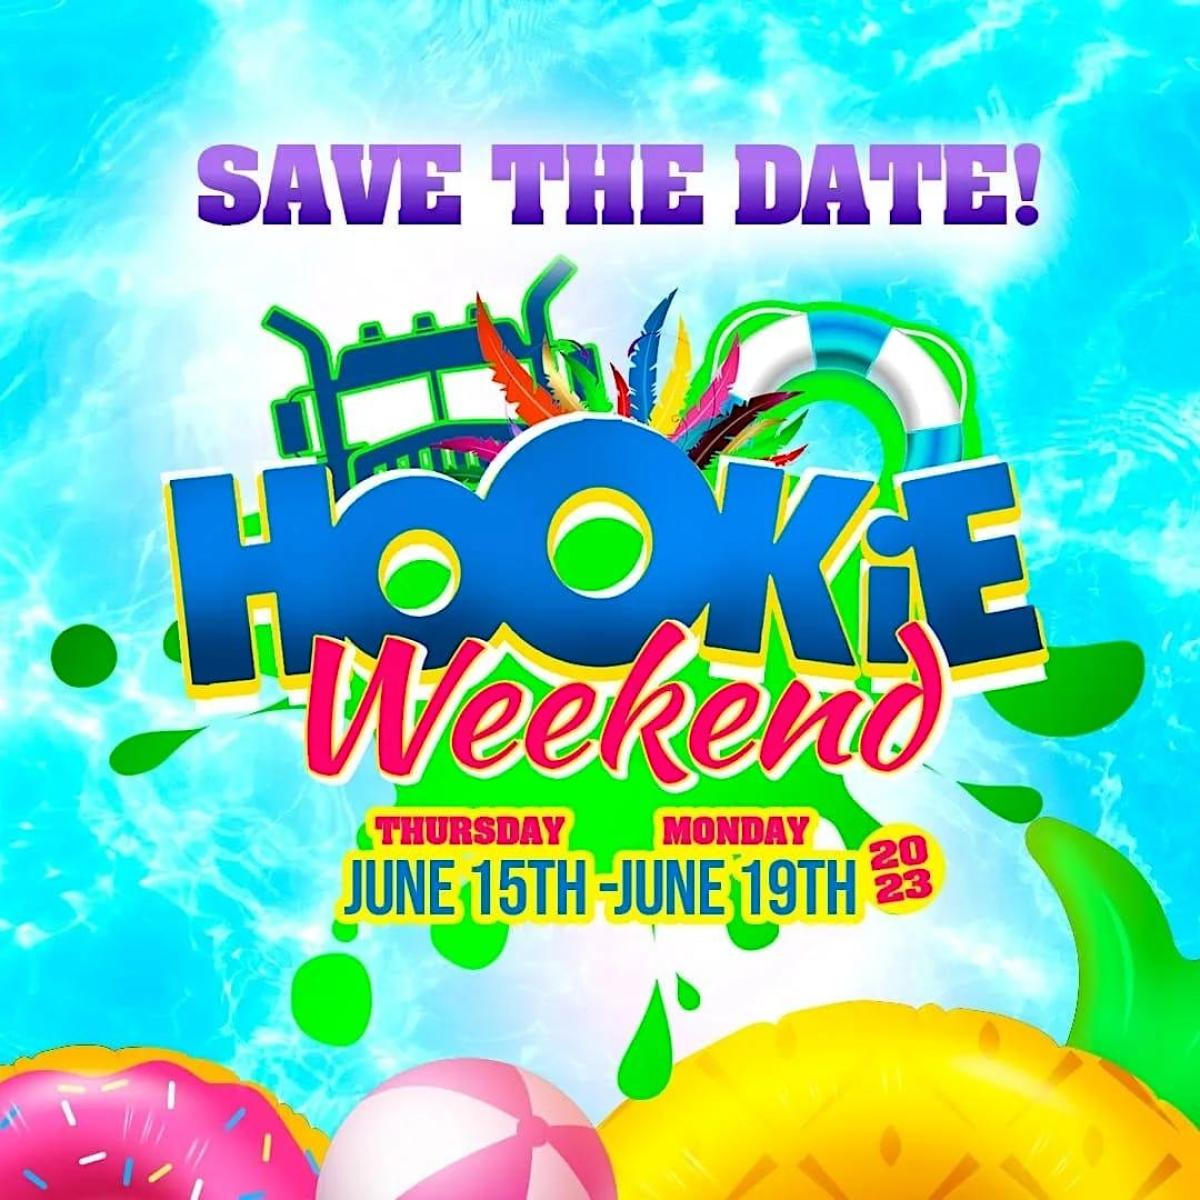 Hookie Weekend All Access Pass flyer or graphic.